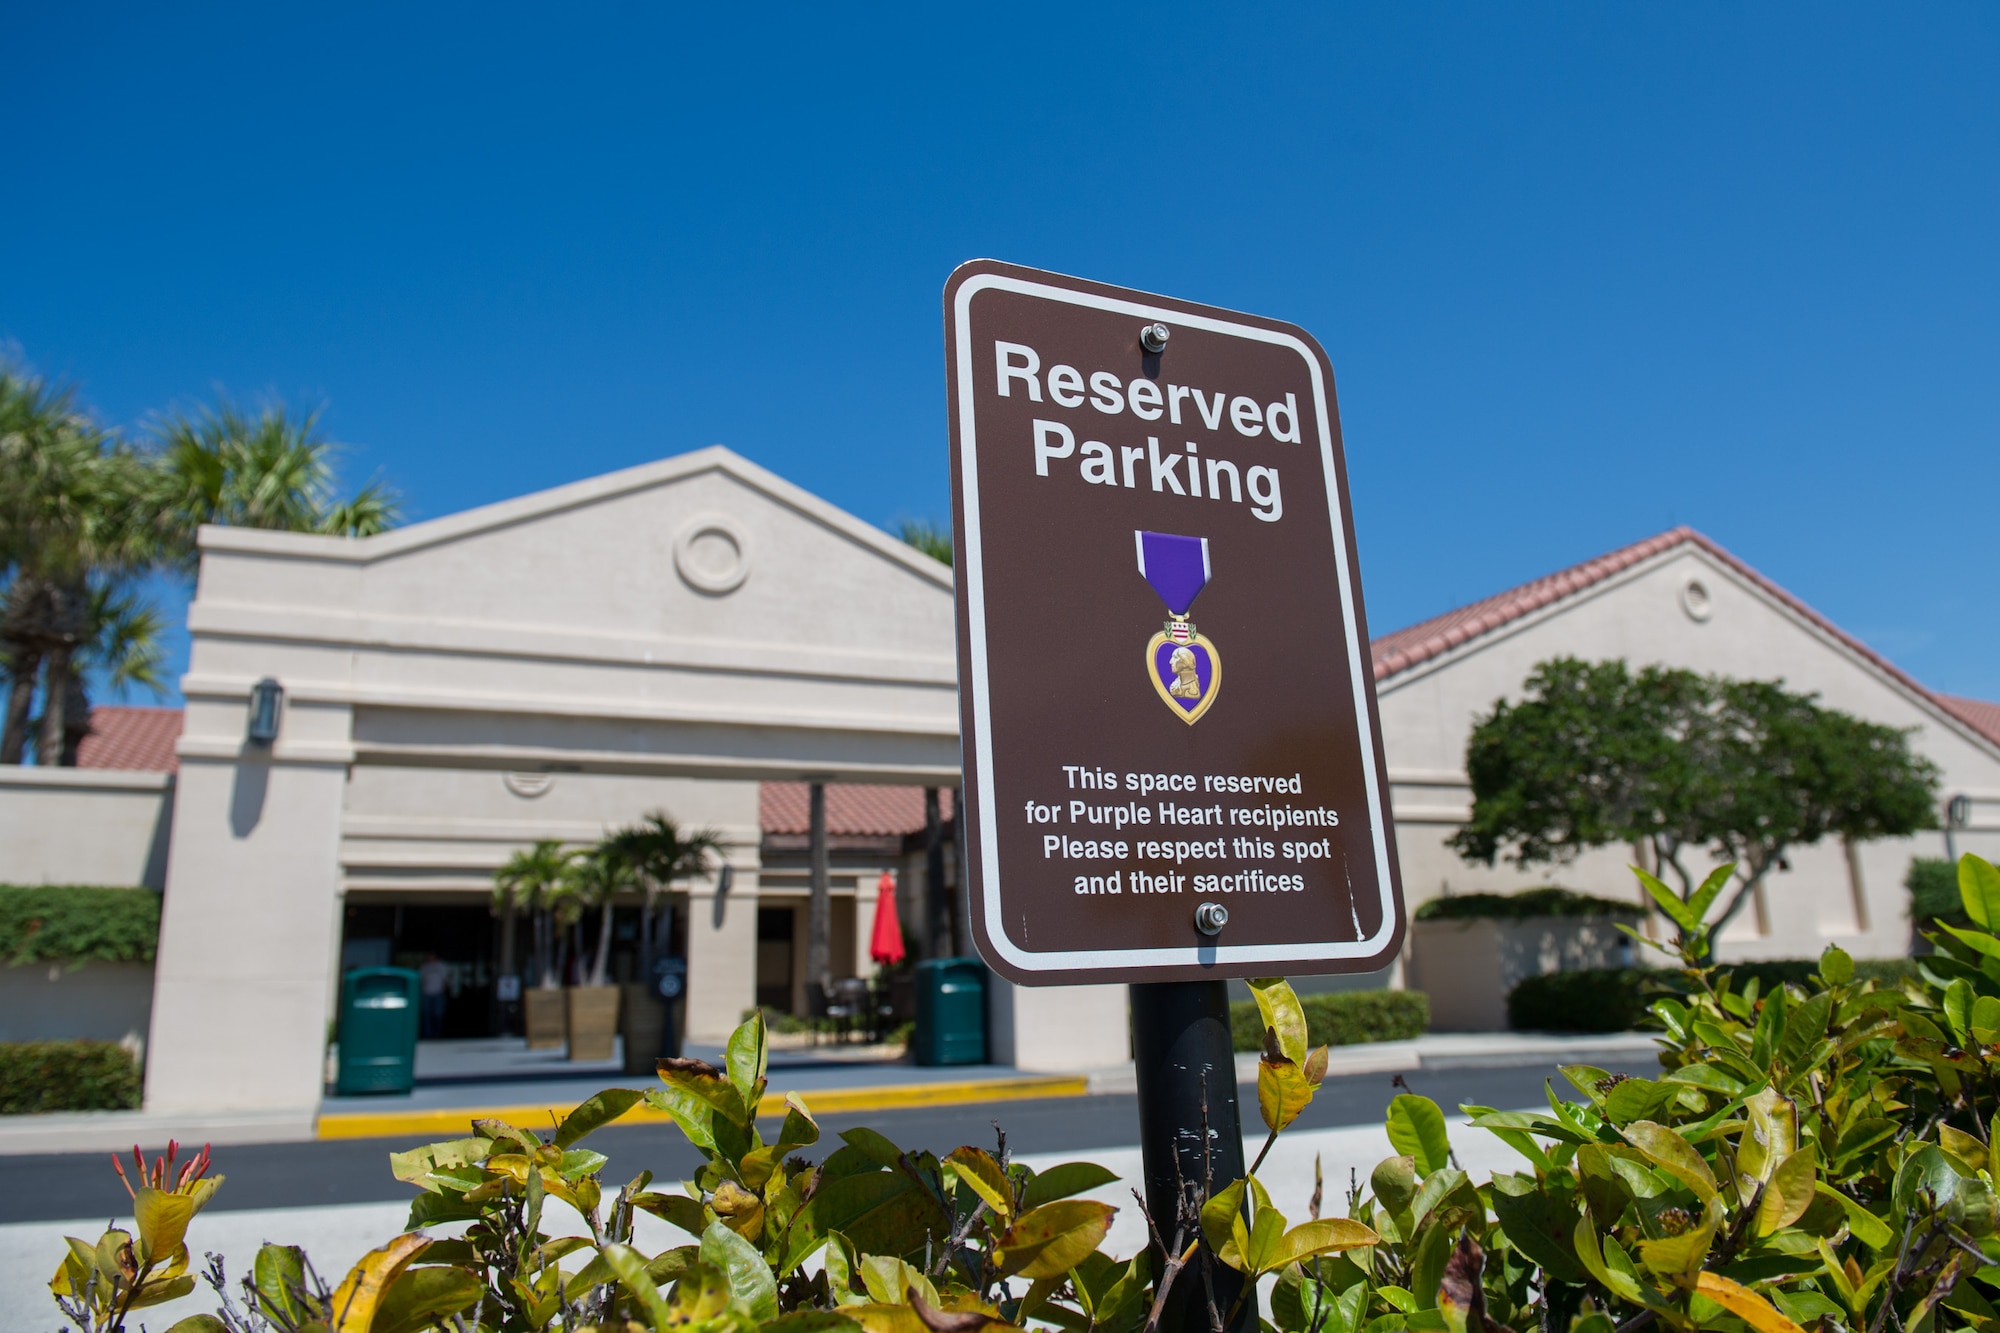 Changes to reserved parking across the installation have materialized over the past three months. In that time, the 45th Civil Engineer Squadron has removed, installed or modified more than 750 reserved parking signs at Patrick Air Force Base and Cape Canaveral Air Force Station, Fla. The changes reflect Brig. Gen. Wayne Monteith, 45th Space Wing commander's vision of what reserved parking should look like on the base. (U.S. Air Force photo/Benjamin Thacker/Released) 